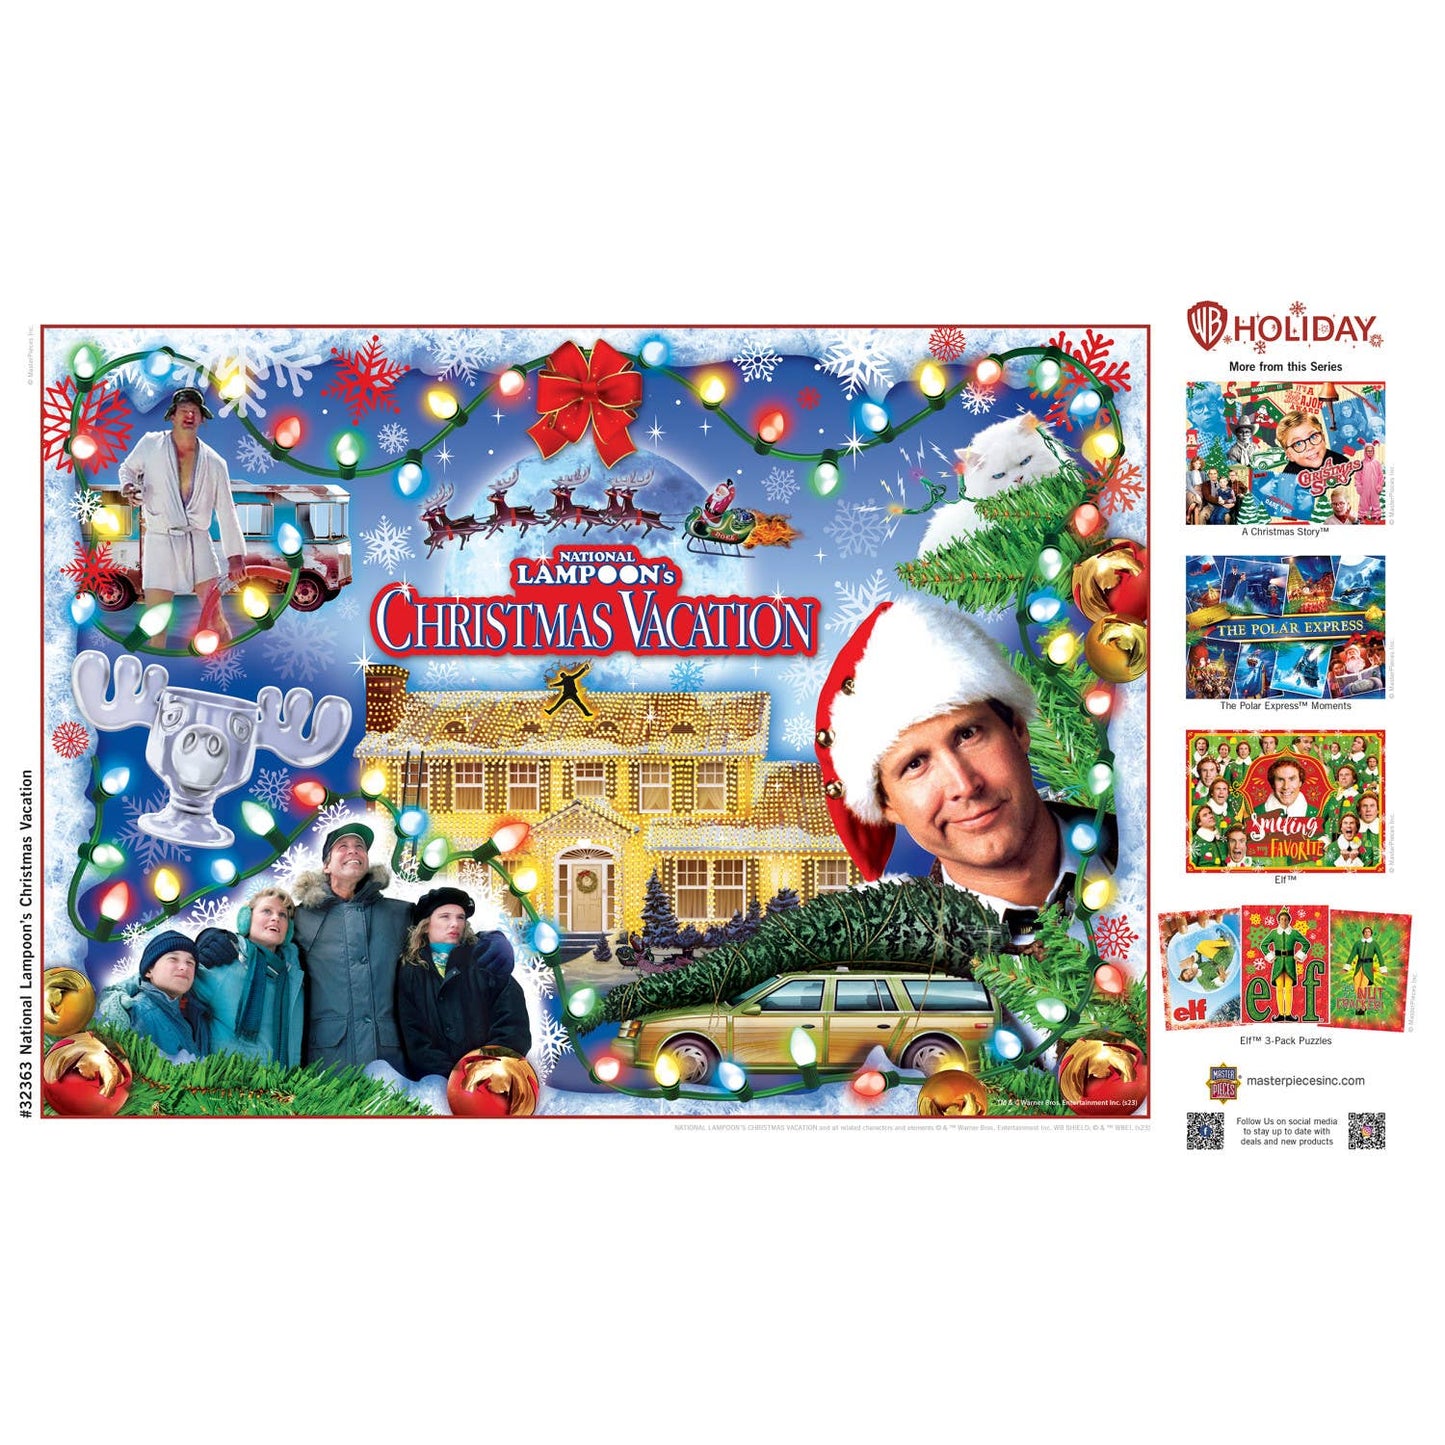 Holiday - Christmas Vacation 500 Piece Jigsaw Puzzle